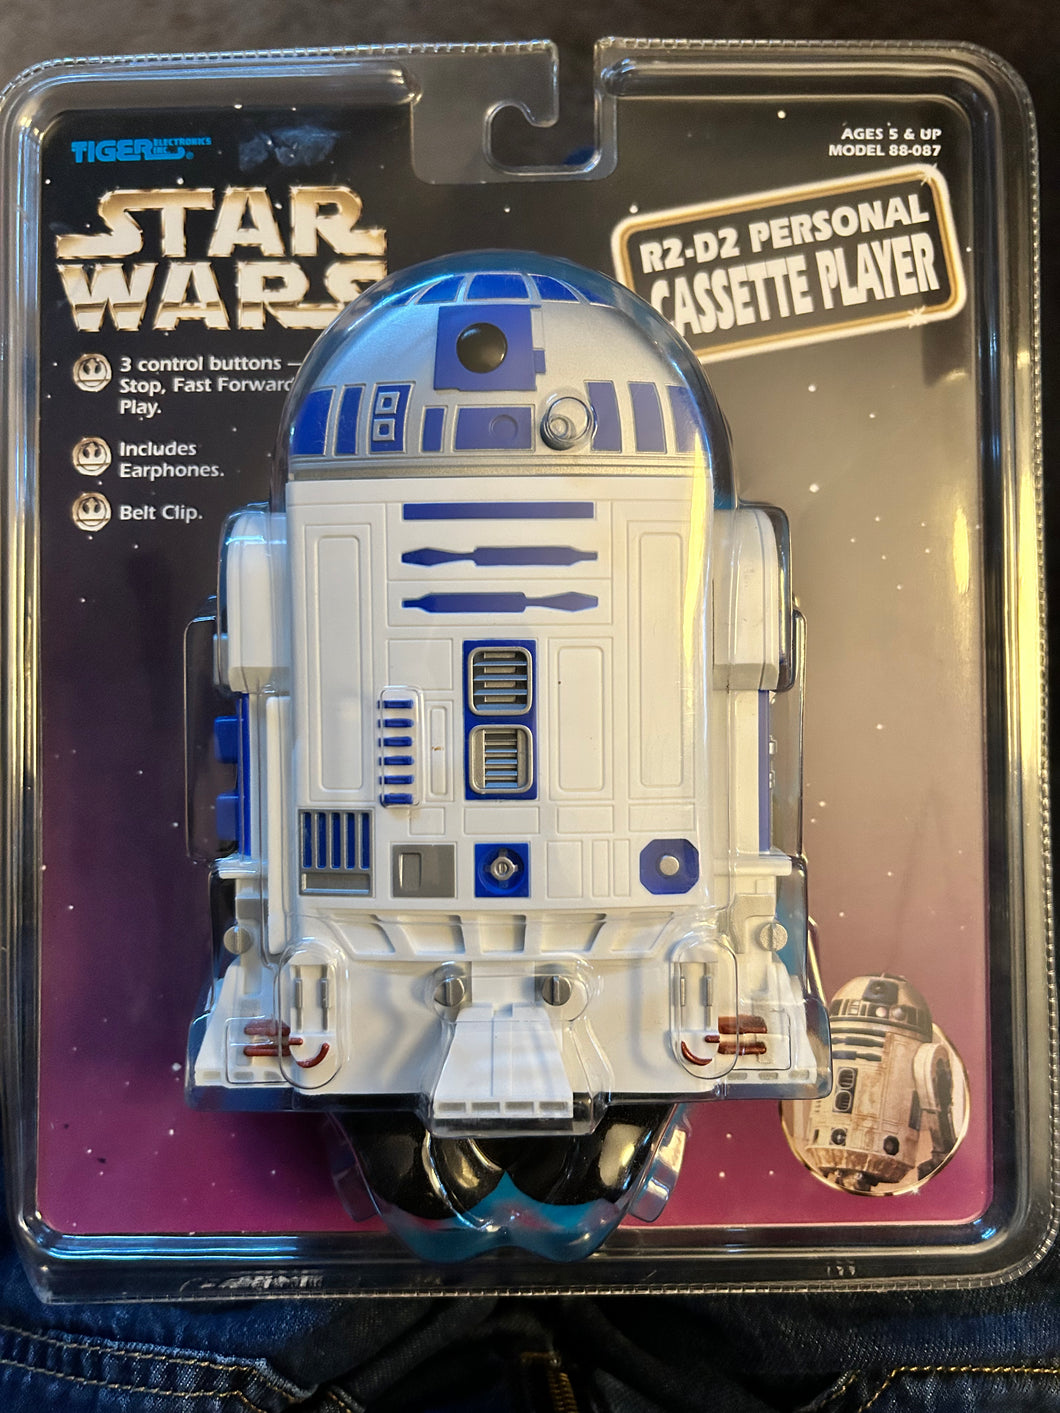 Original Star Wars vintage New in package. R2-D2 Data Droid Portable Cassette Player.